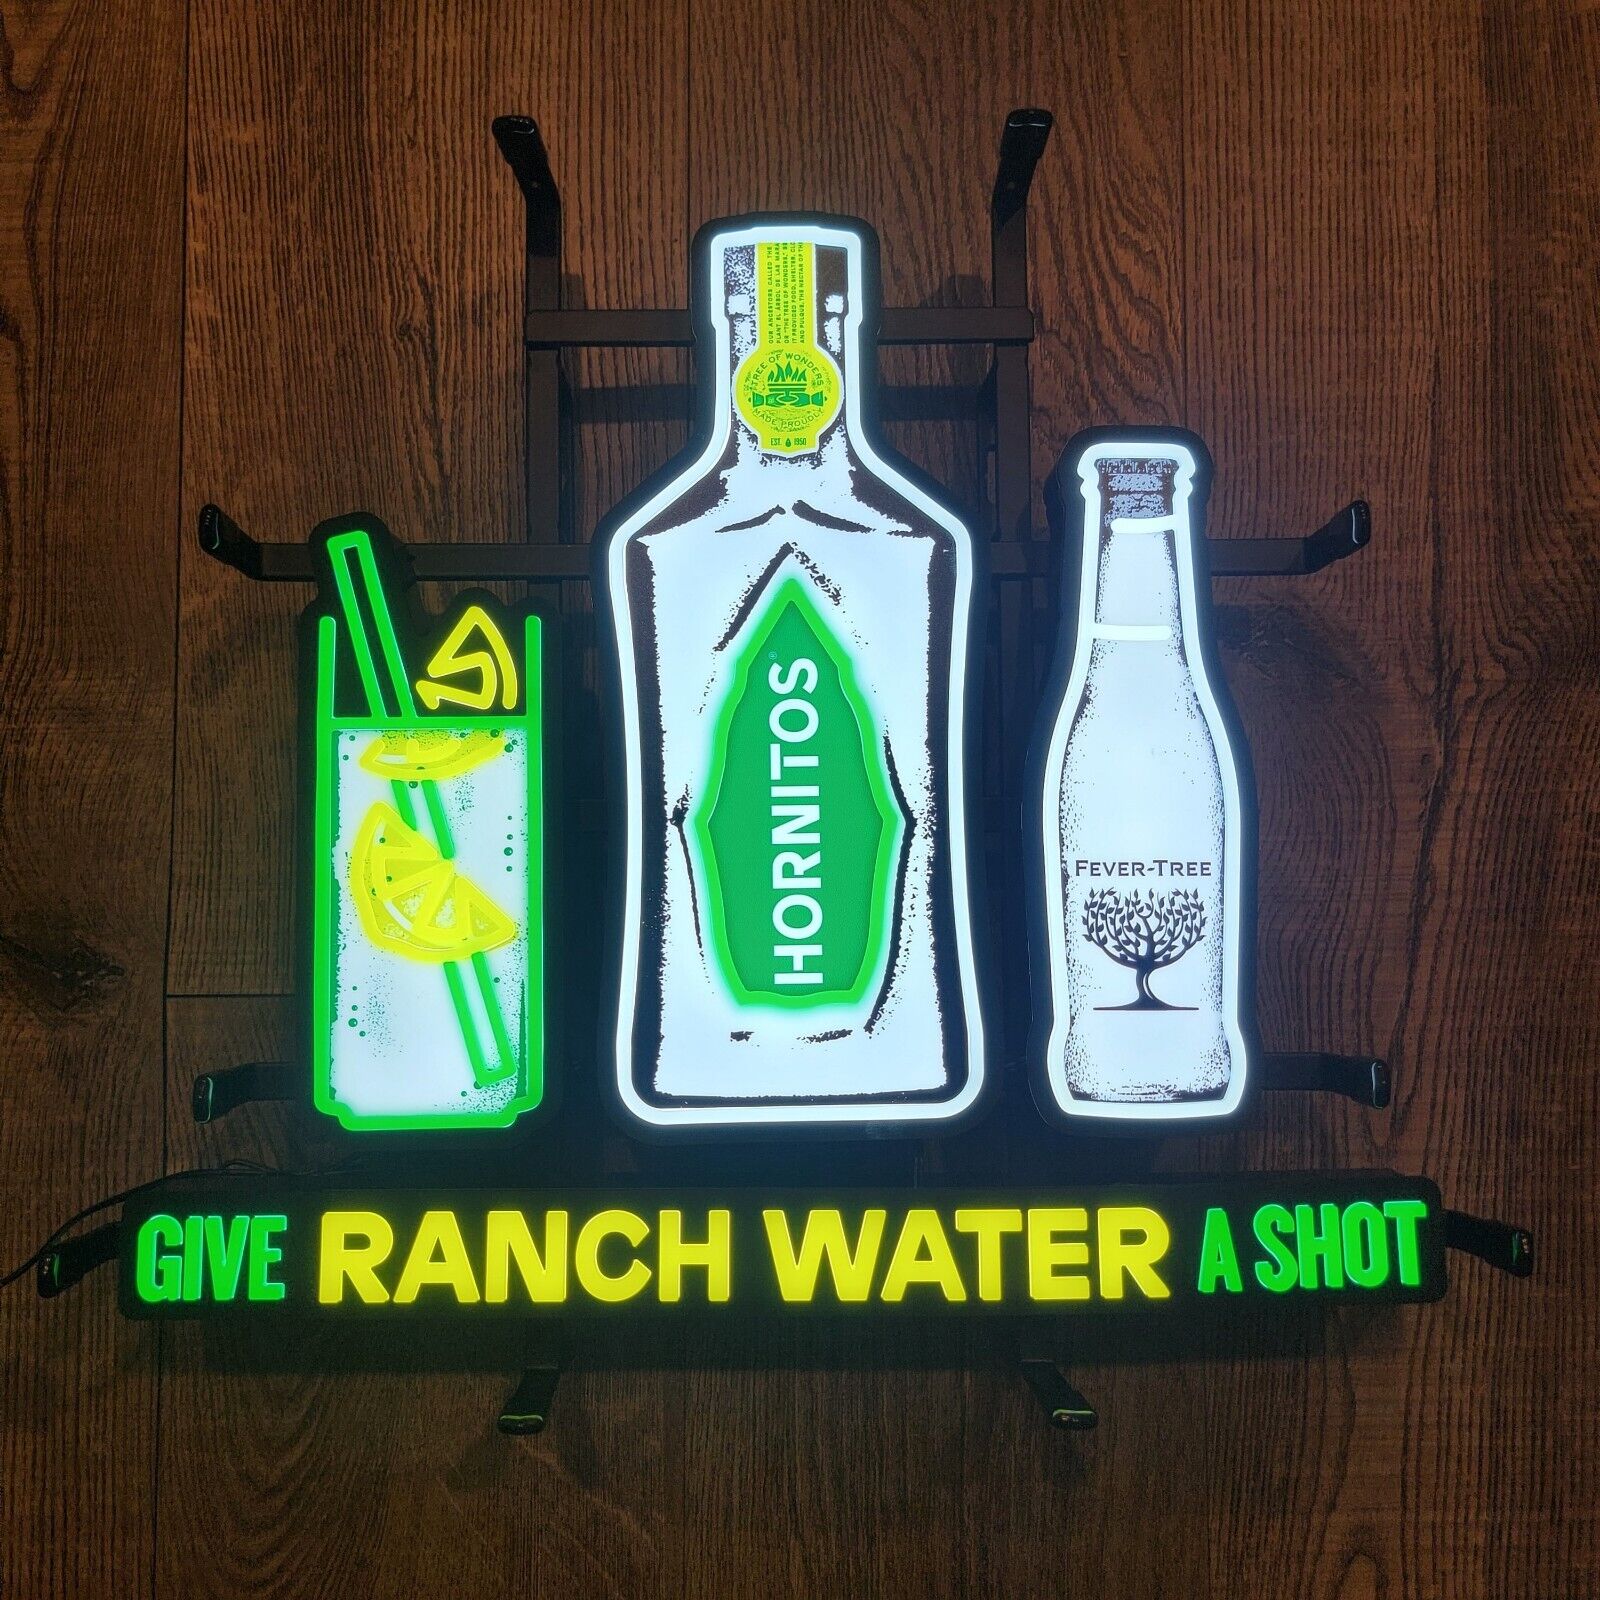 HORNITOS TEQUILA RANCH WATER LED BAR SIGN MAN CAVE GARAGE DECOR LIGHT NEW 17x16: